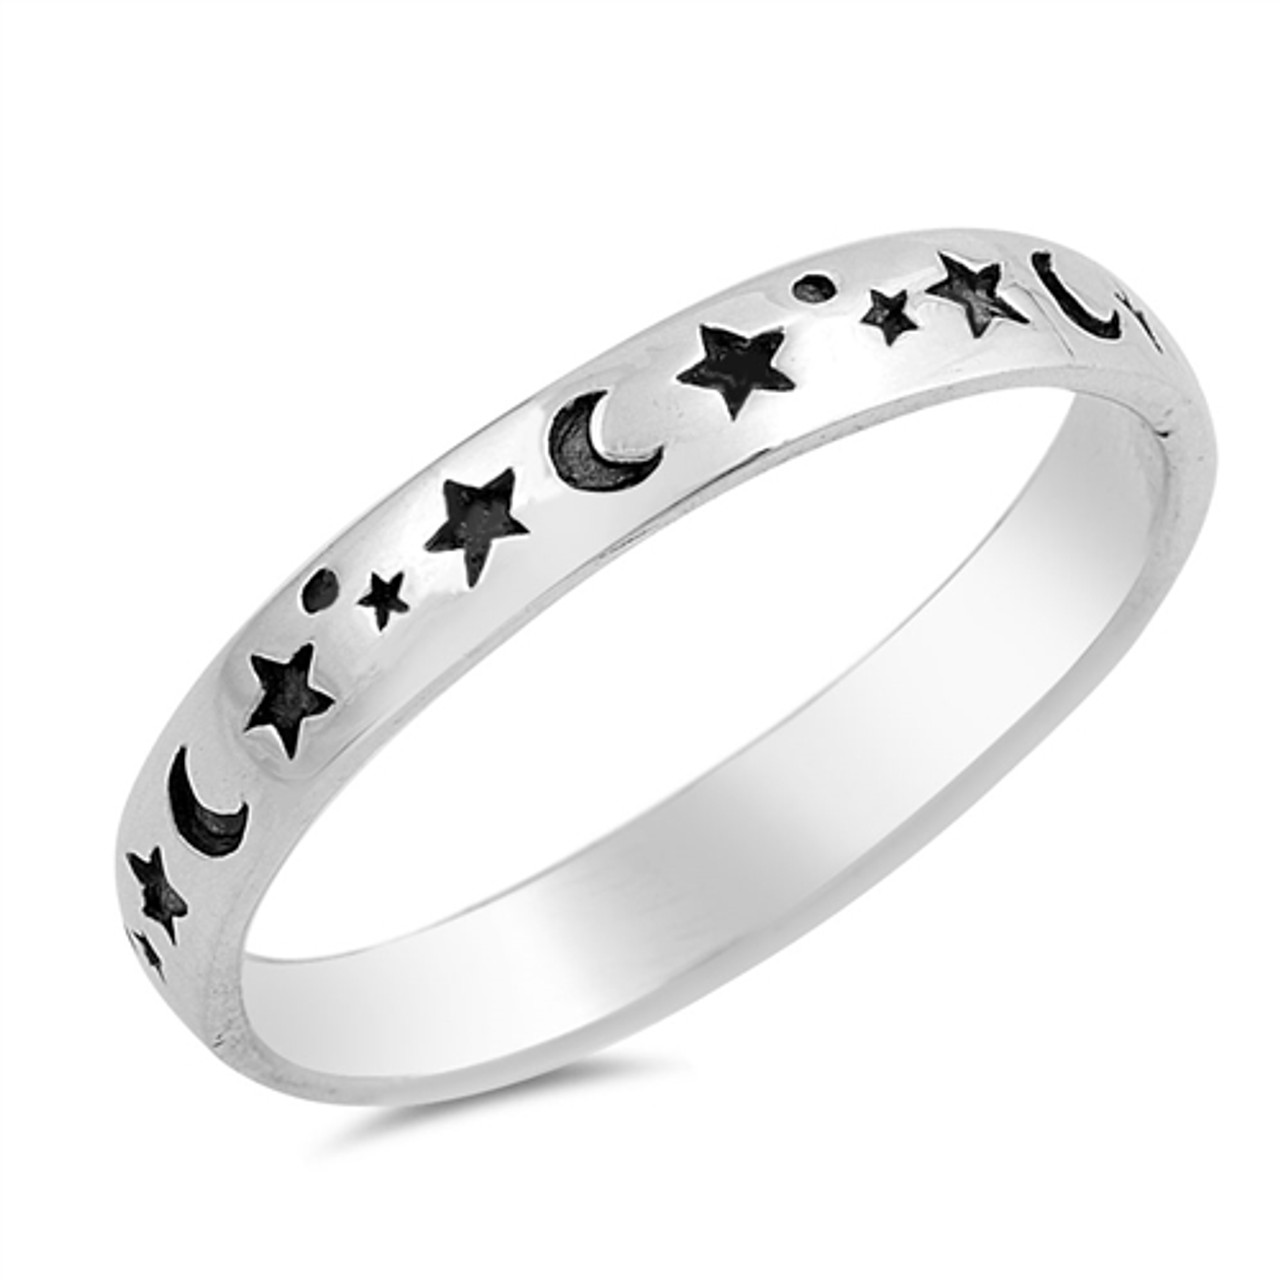 Silver Sun Moon Universe Ring Black Oxidized Wedding Promise Statement Anniversary Valentines Gift Ring 